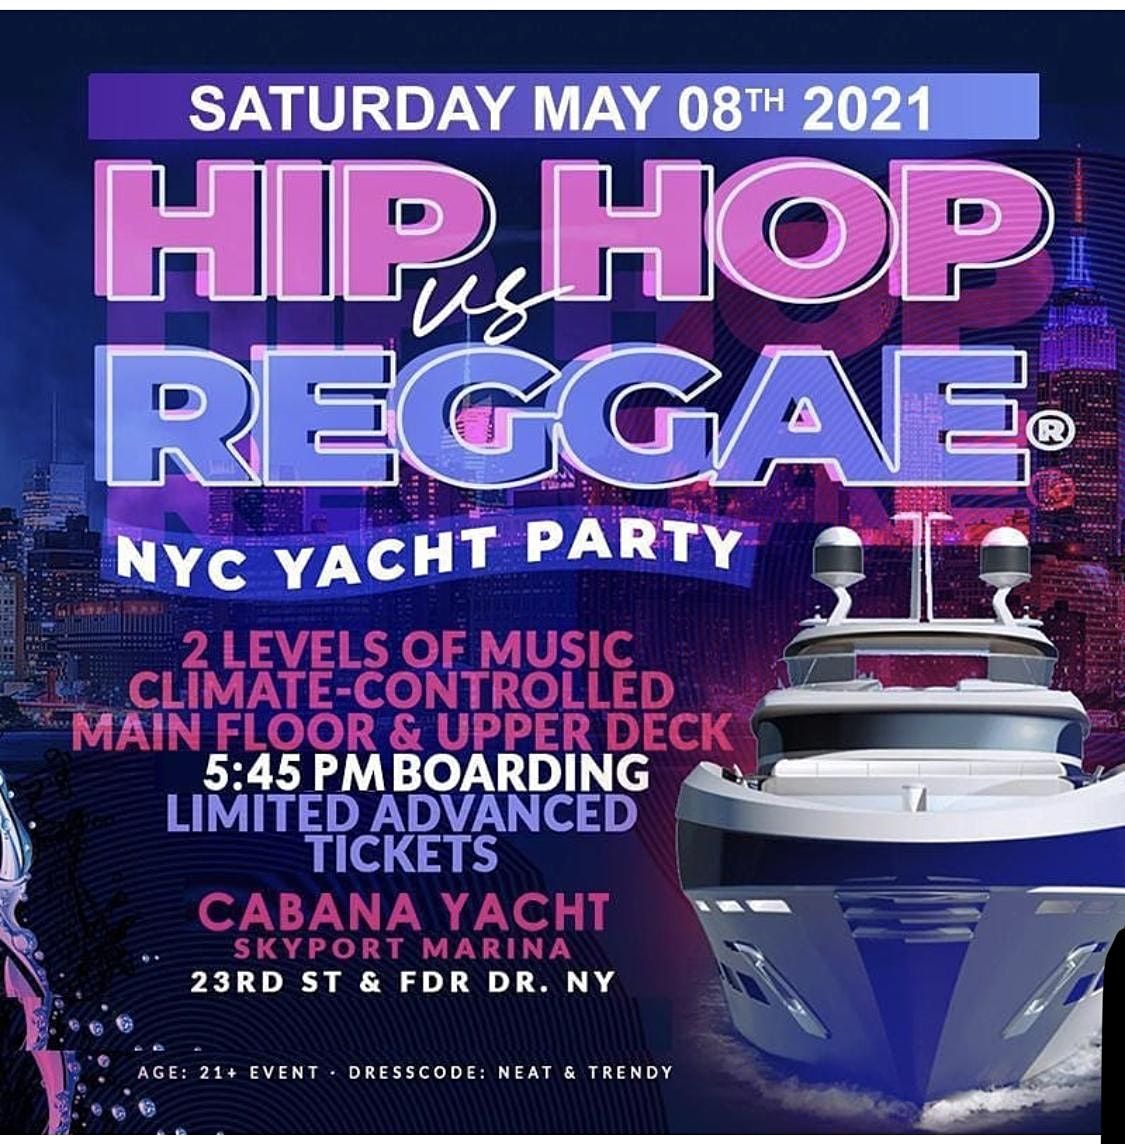 MIDNIGHT YACHT PARTY NYC! Fri., August 27th